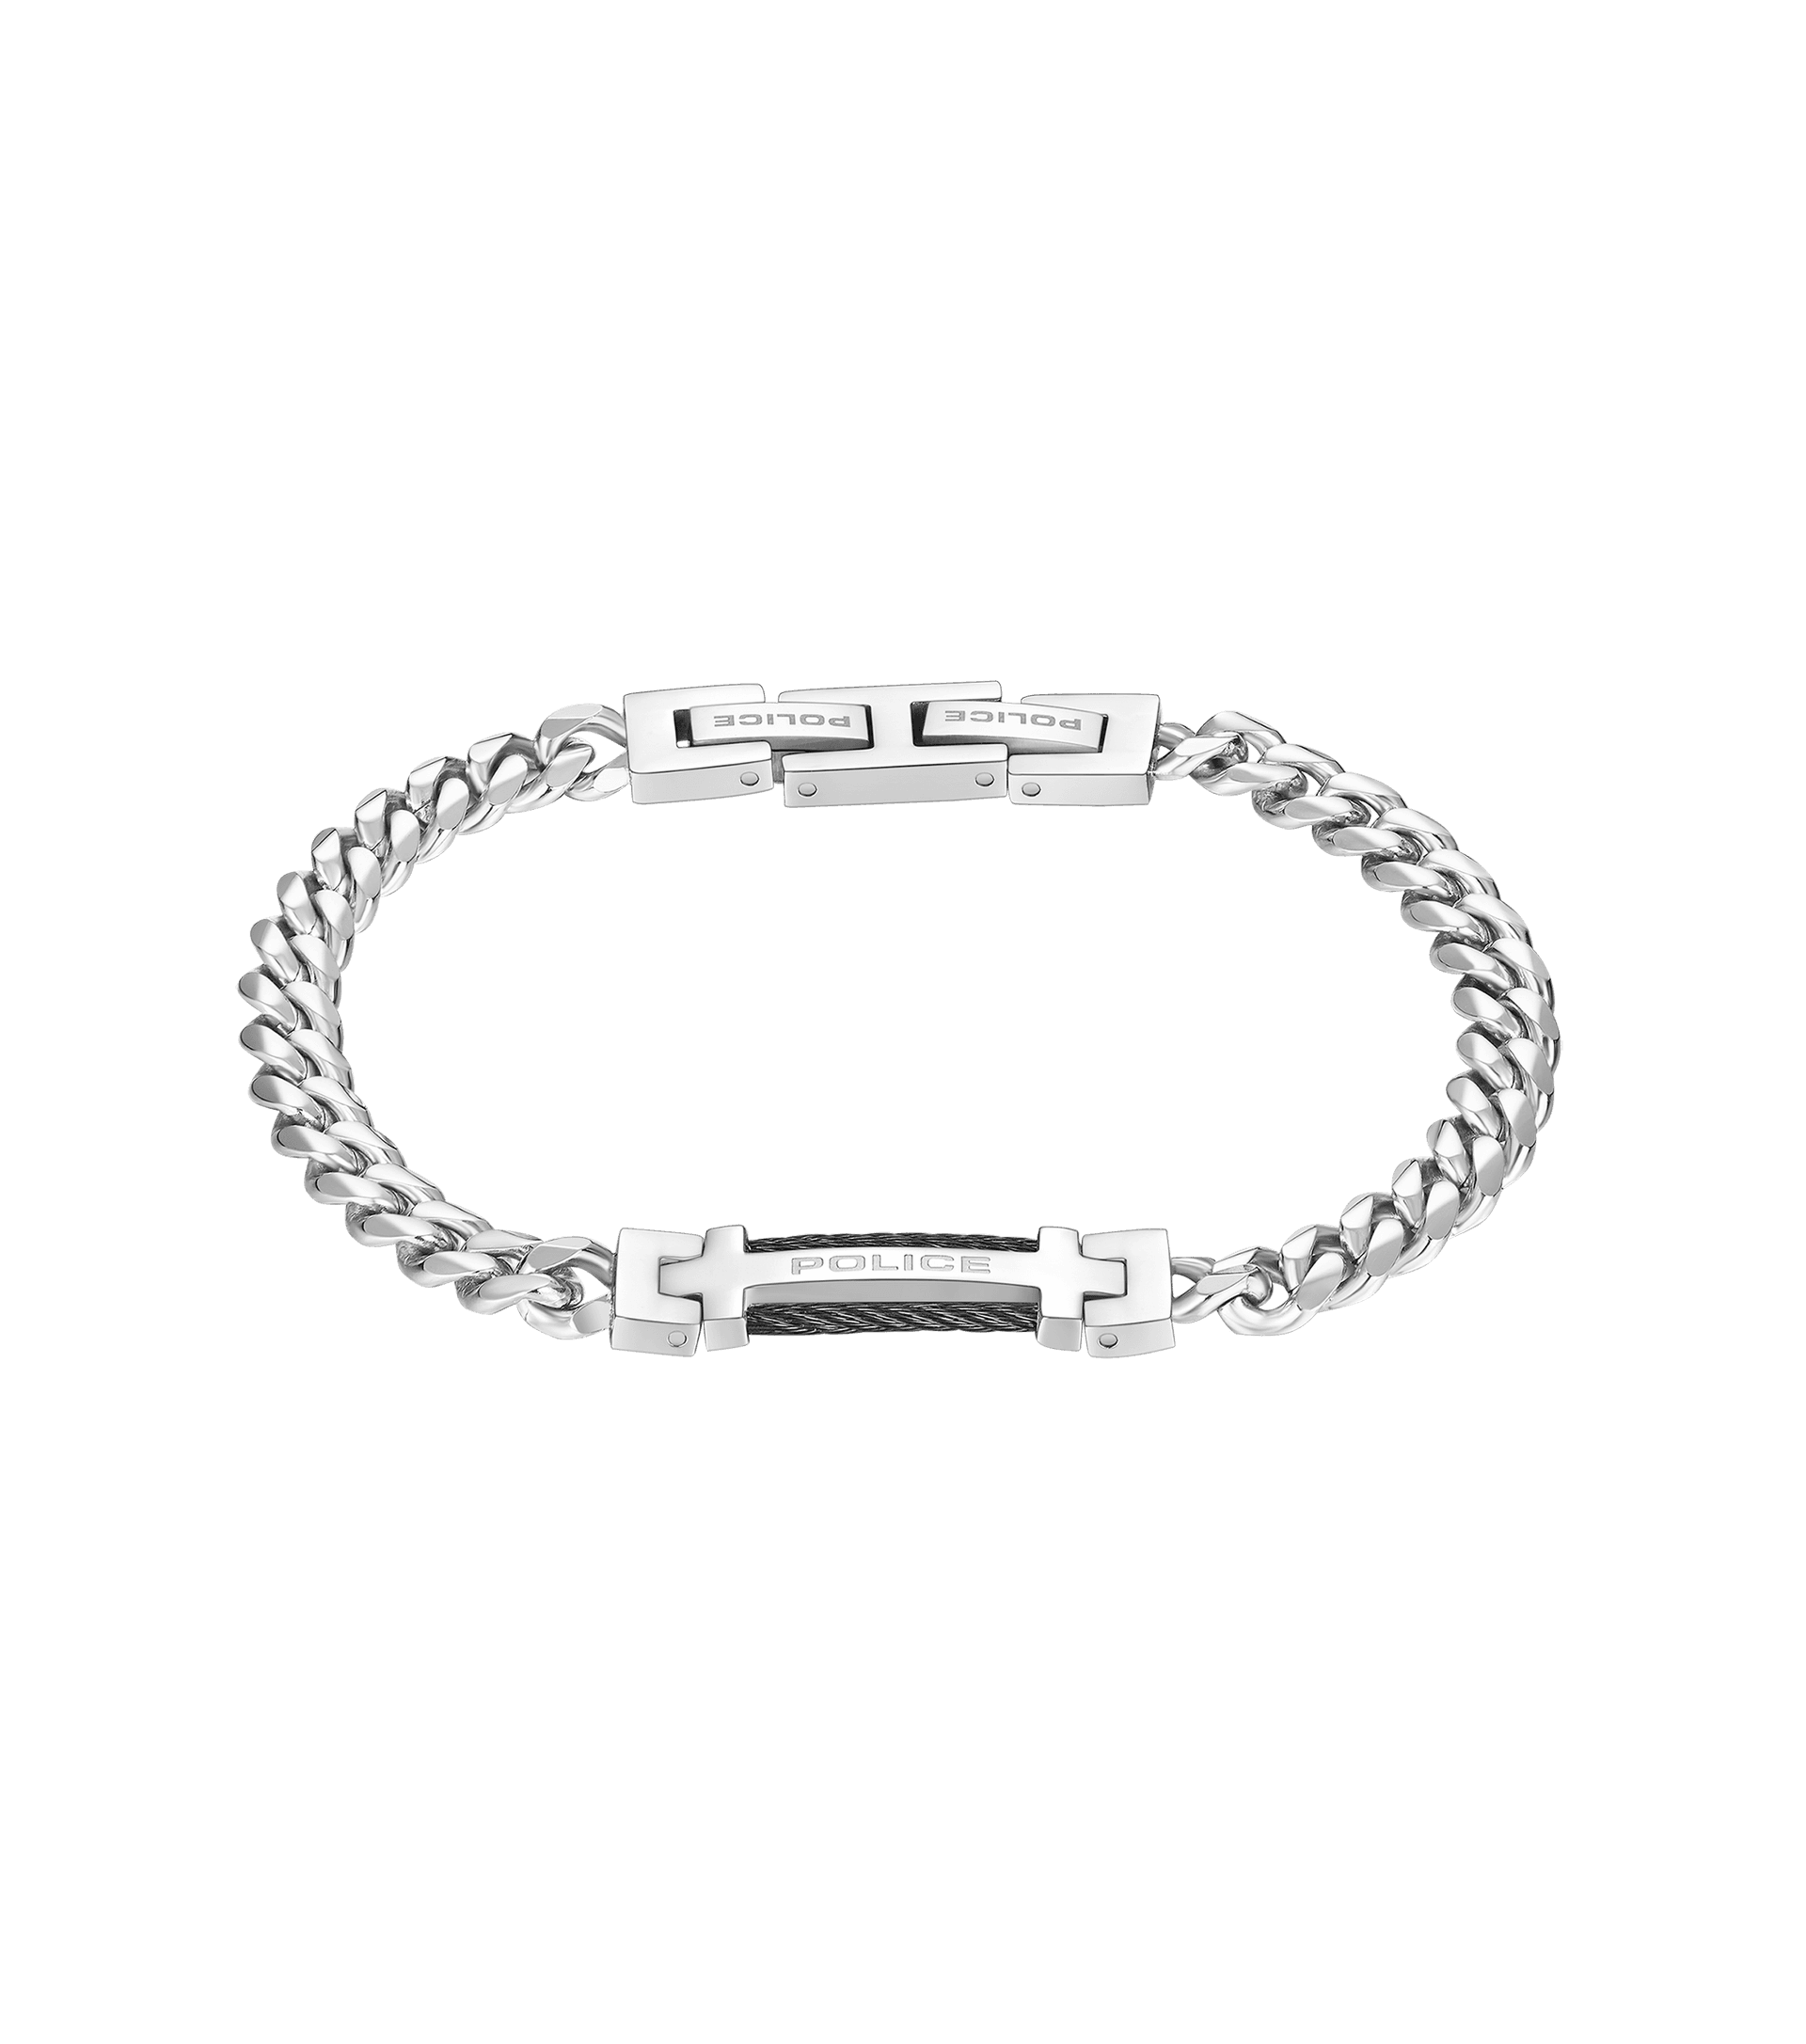 Police jewels - Salute Bracelet PEAGB0010101 II For By Men Police